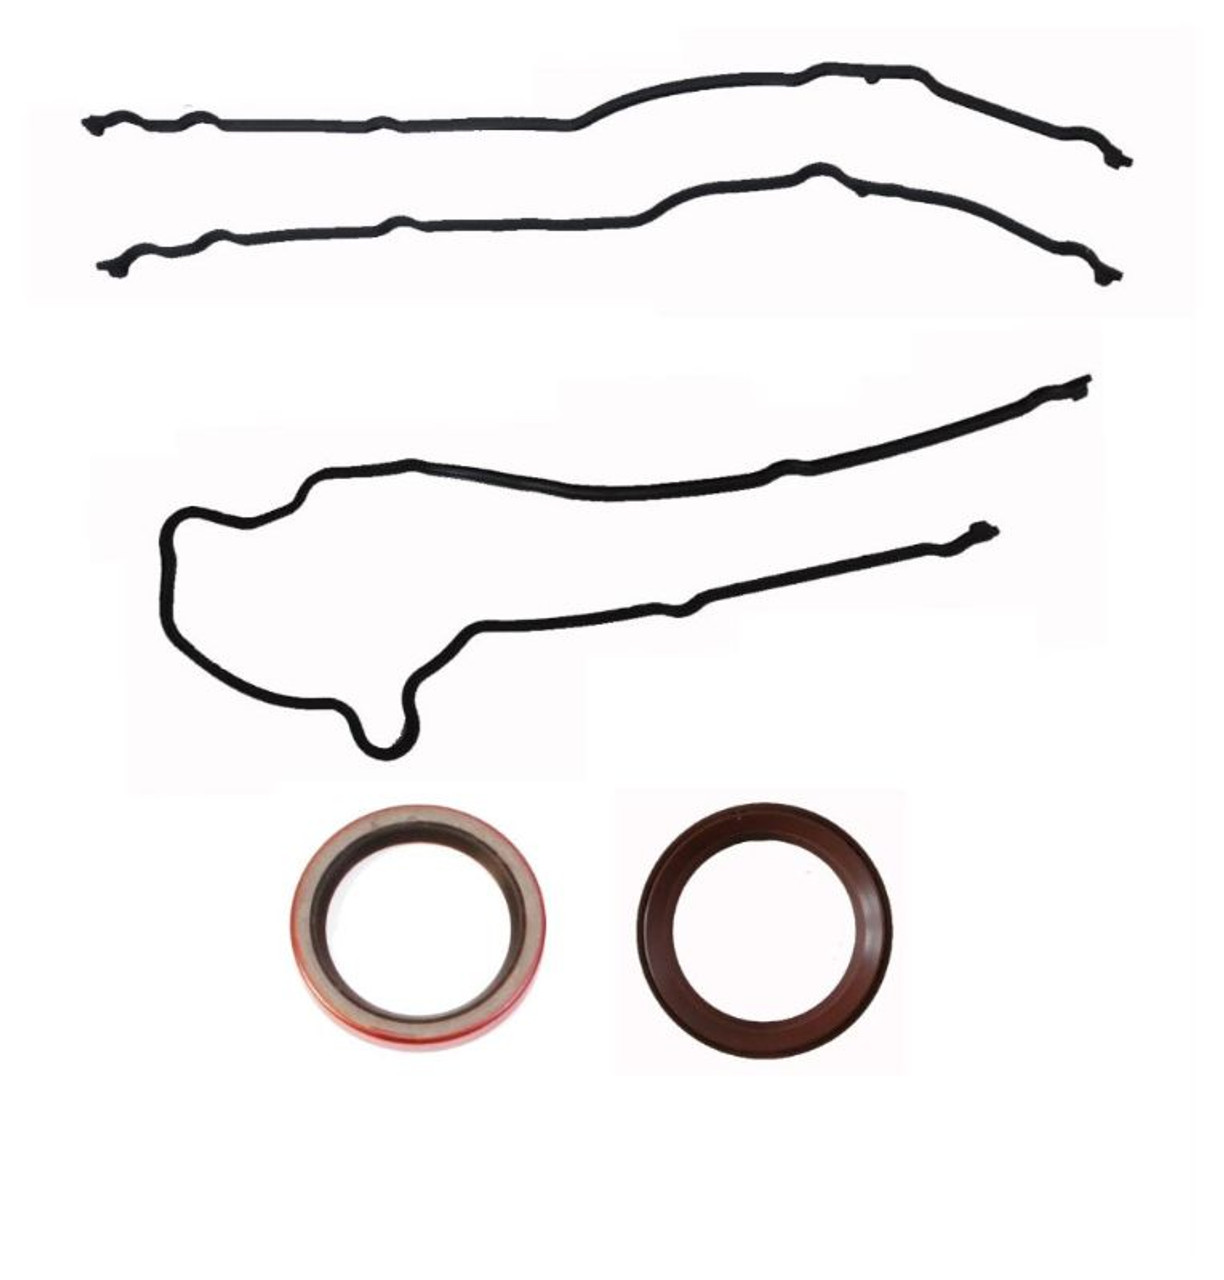 2003 Ford E-150 Club Wagon 5.4L Engine Timing Cover Gasket Set TCF330-A -147